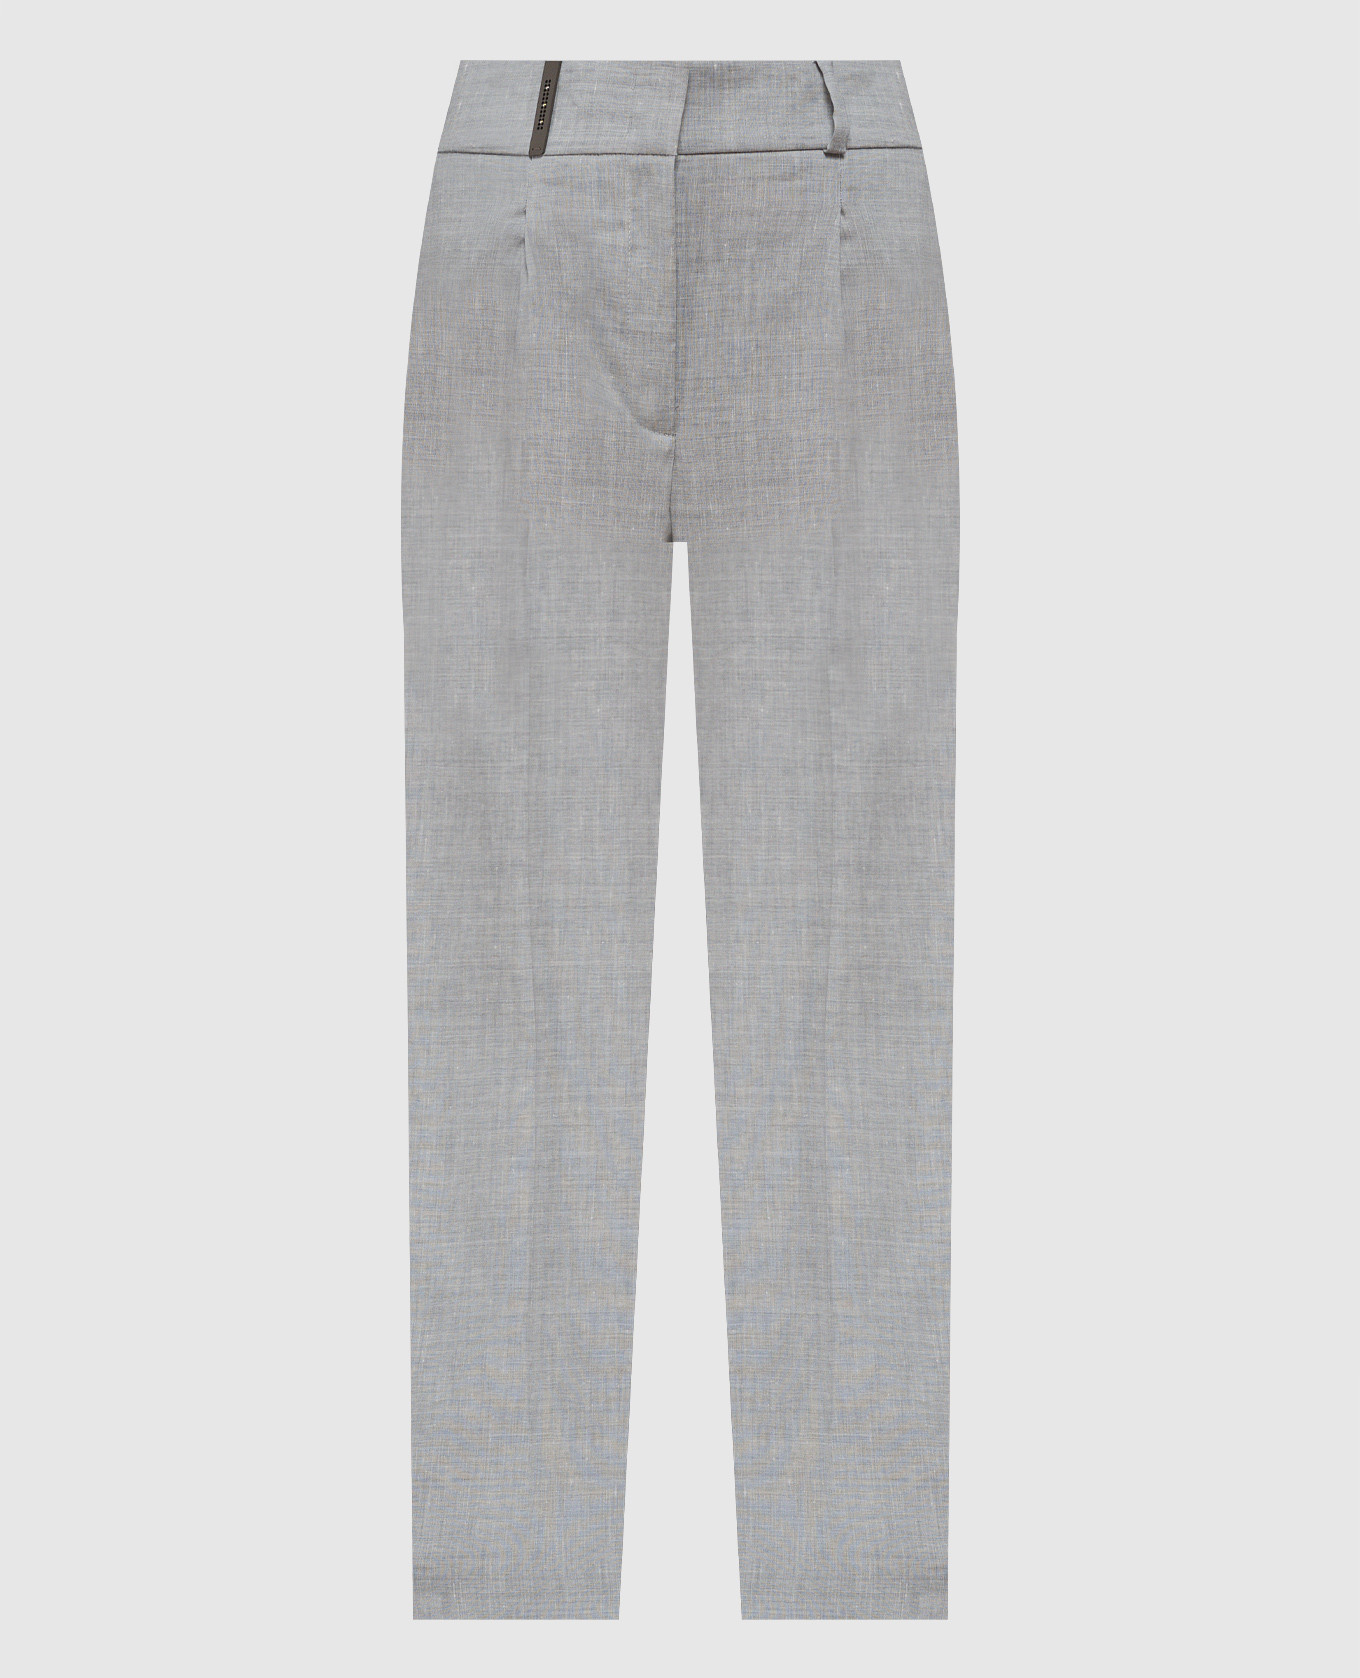 Gray wool and linen trousers with monil chain